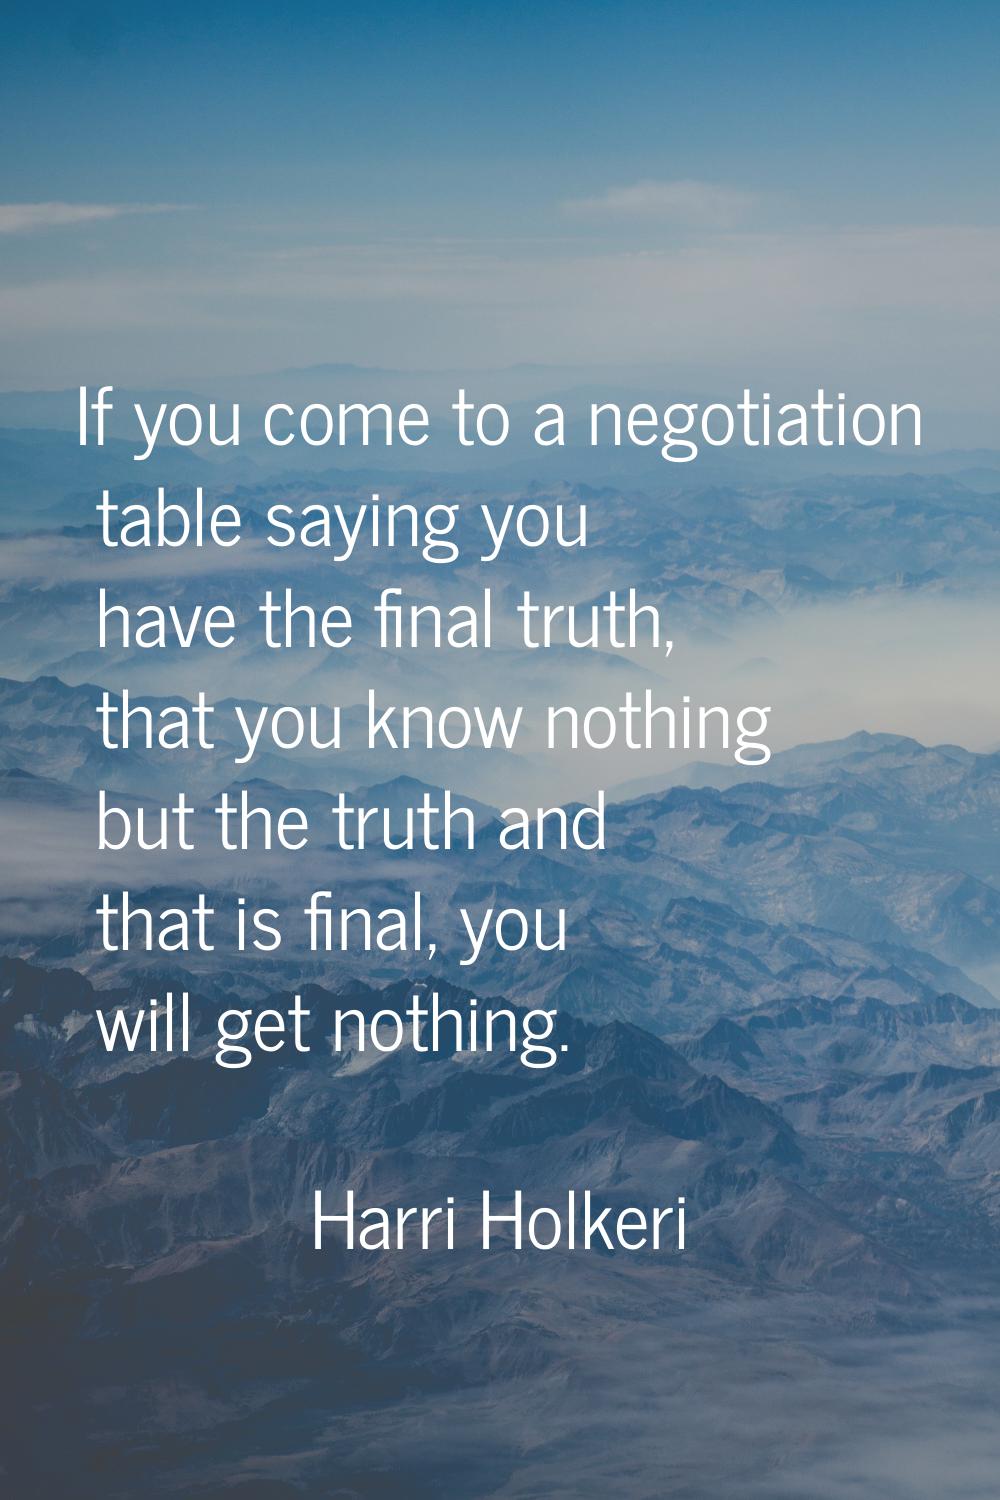 If you come to a negotiation table saying you have the final truth, that you know nothing but the t